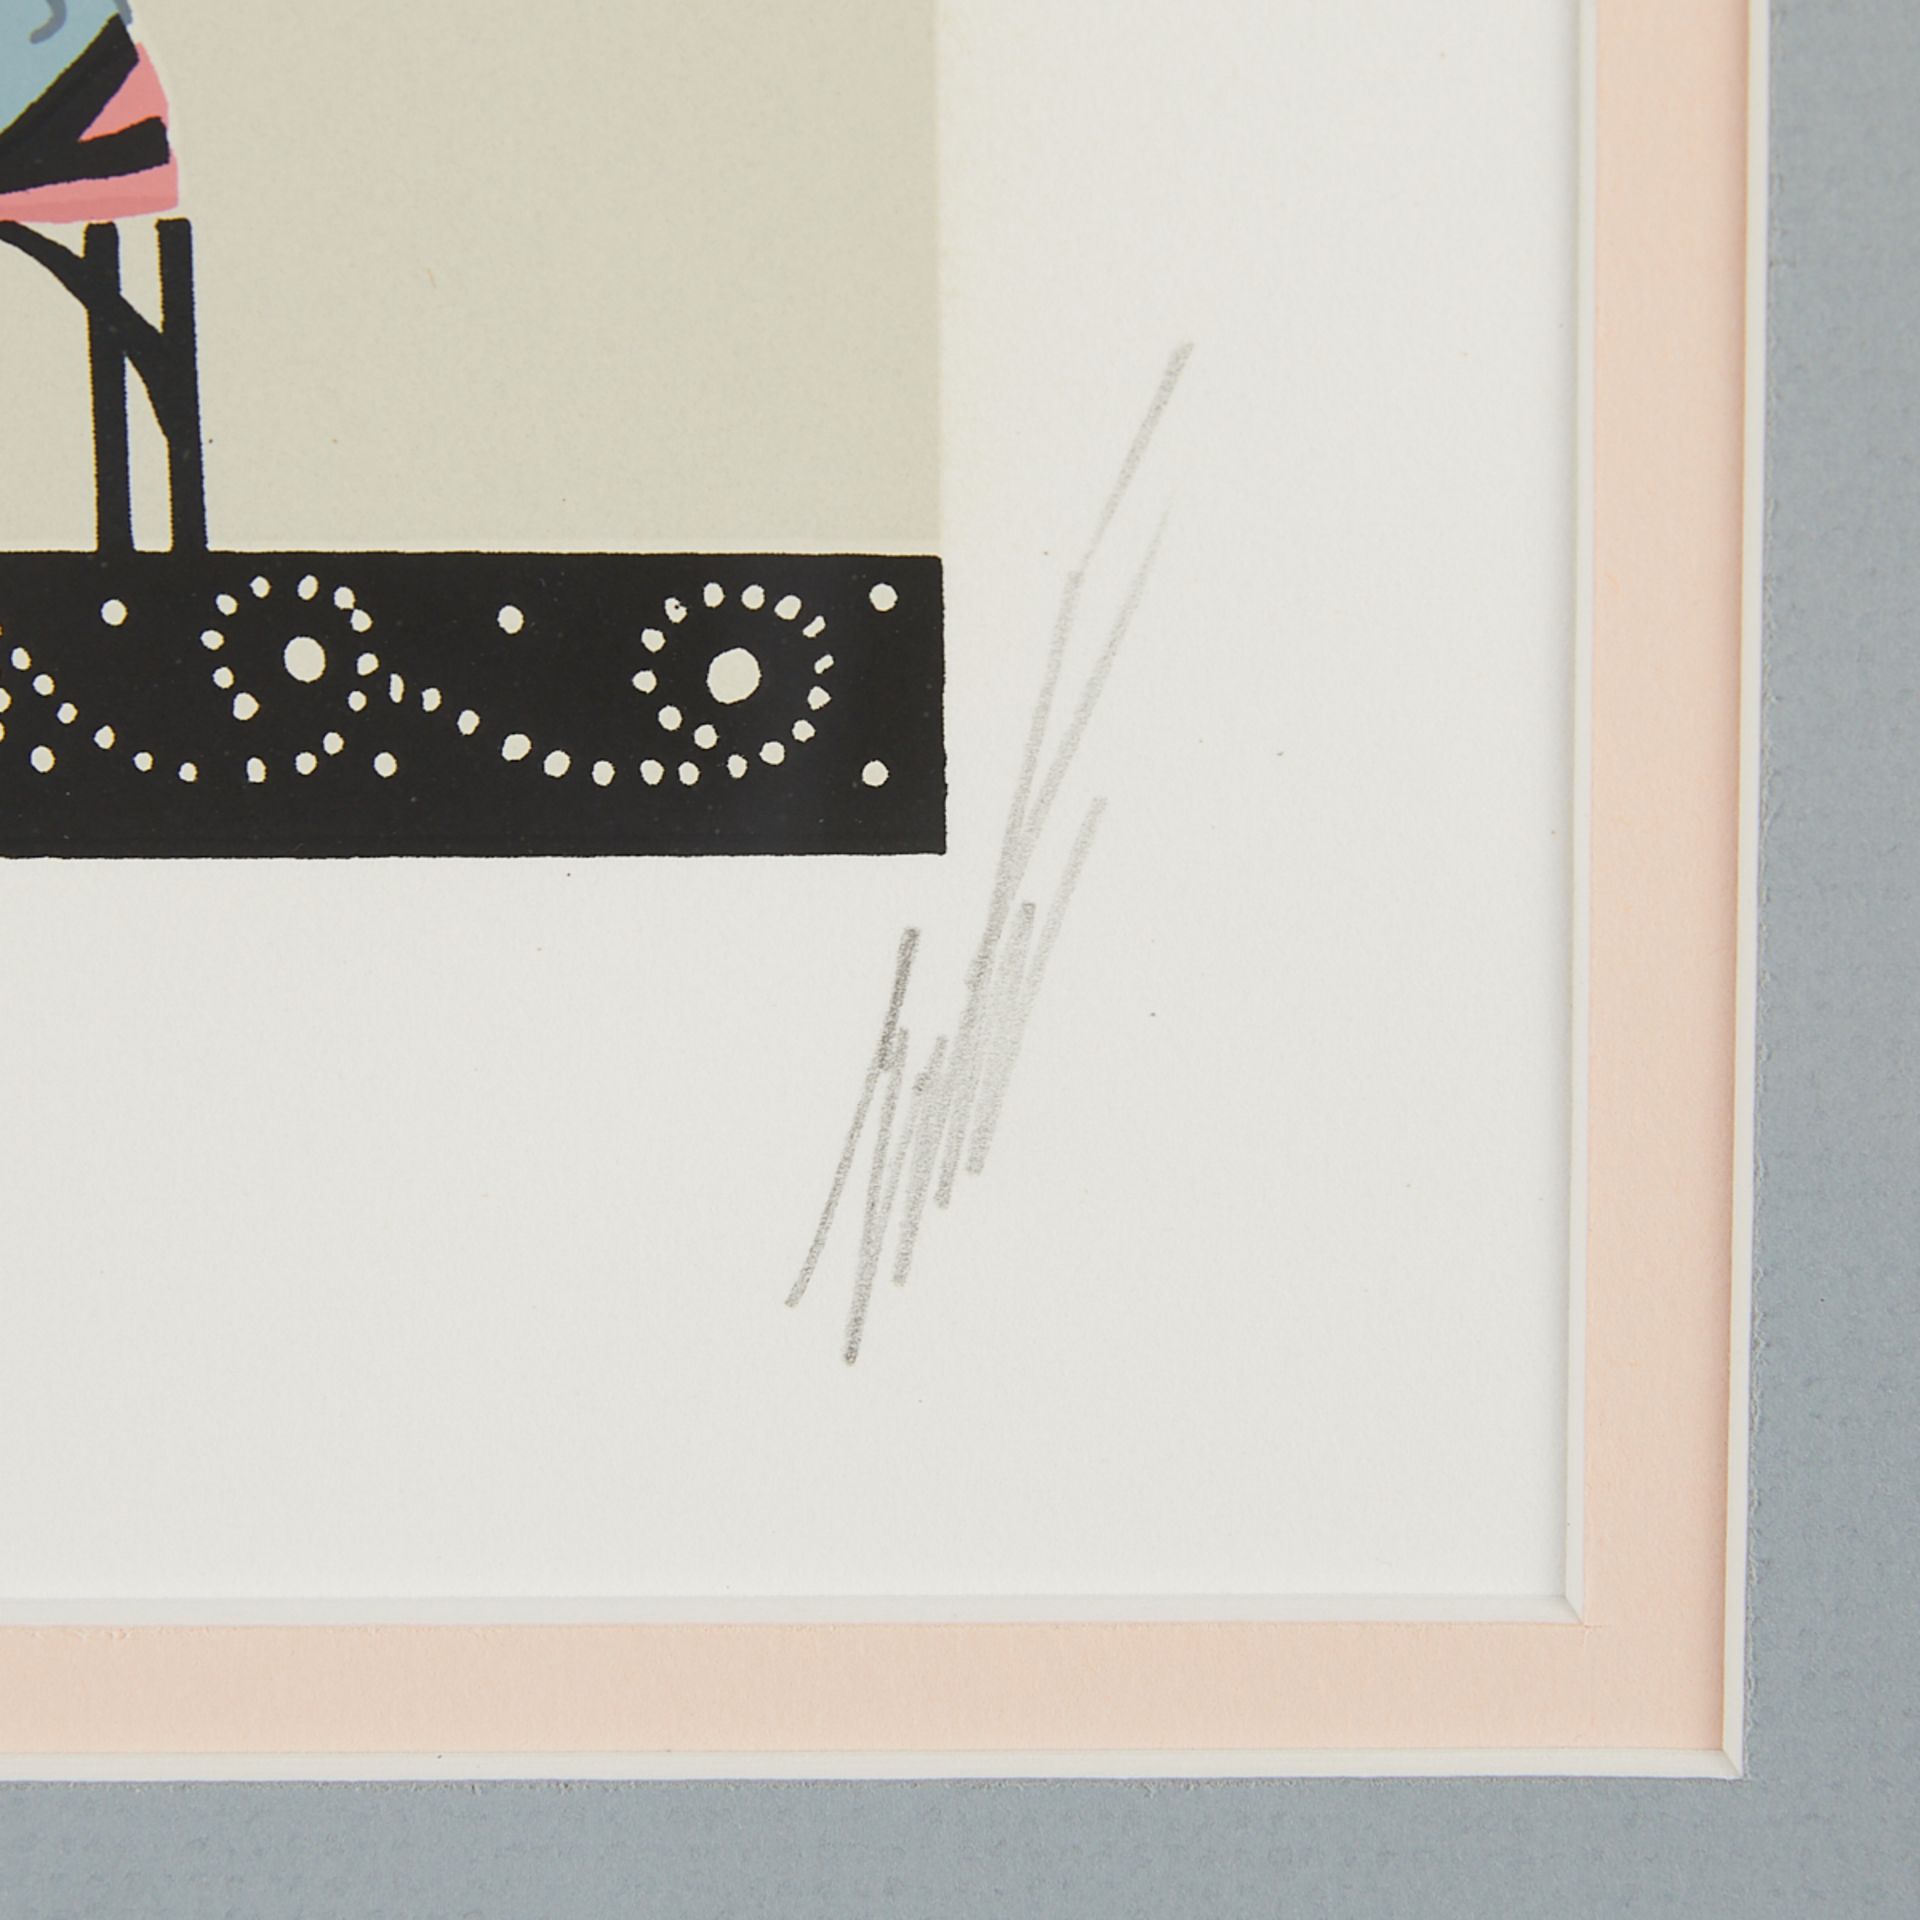 Erte "The Flowered Cape" Serigraph 1981 - Image 6 of 9